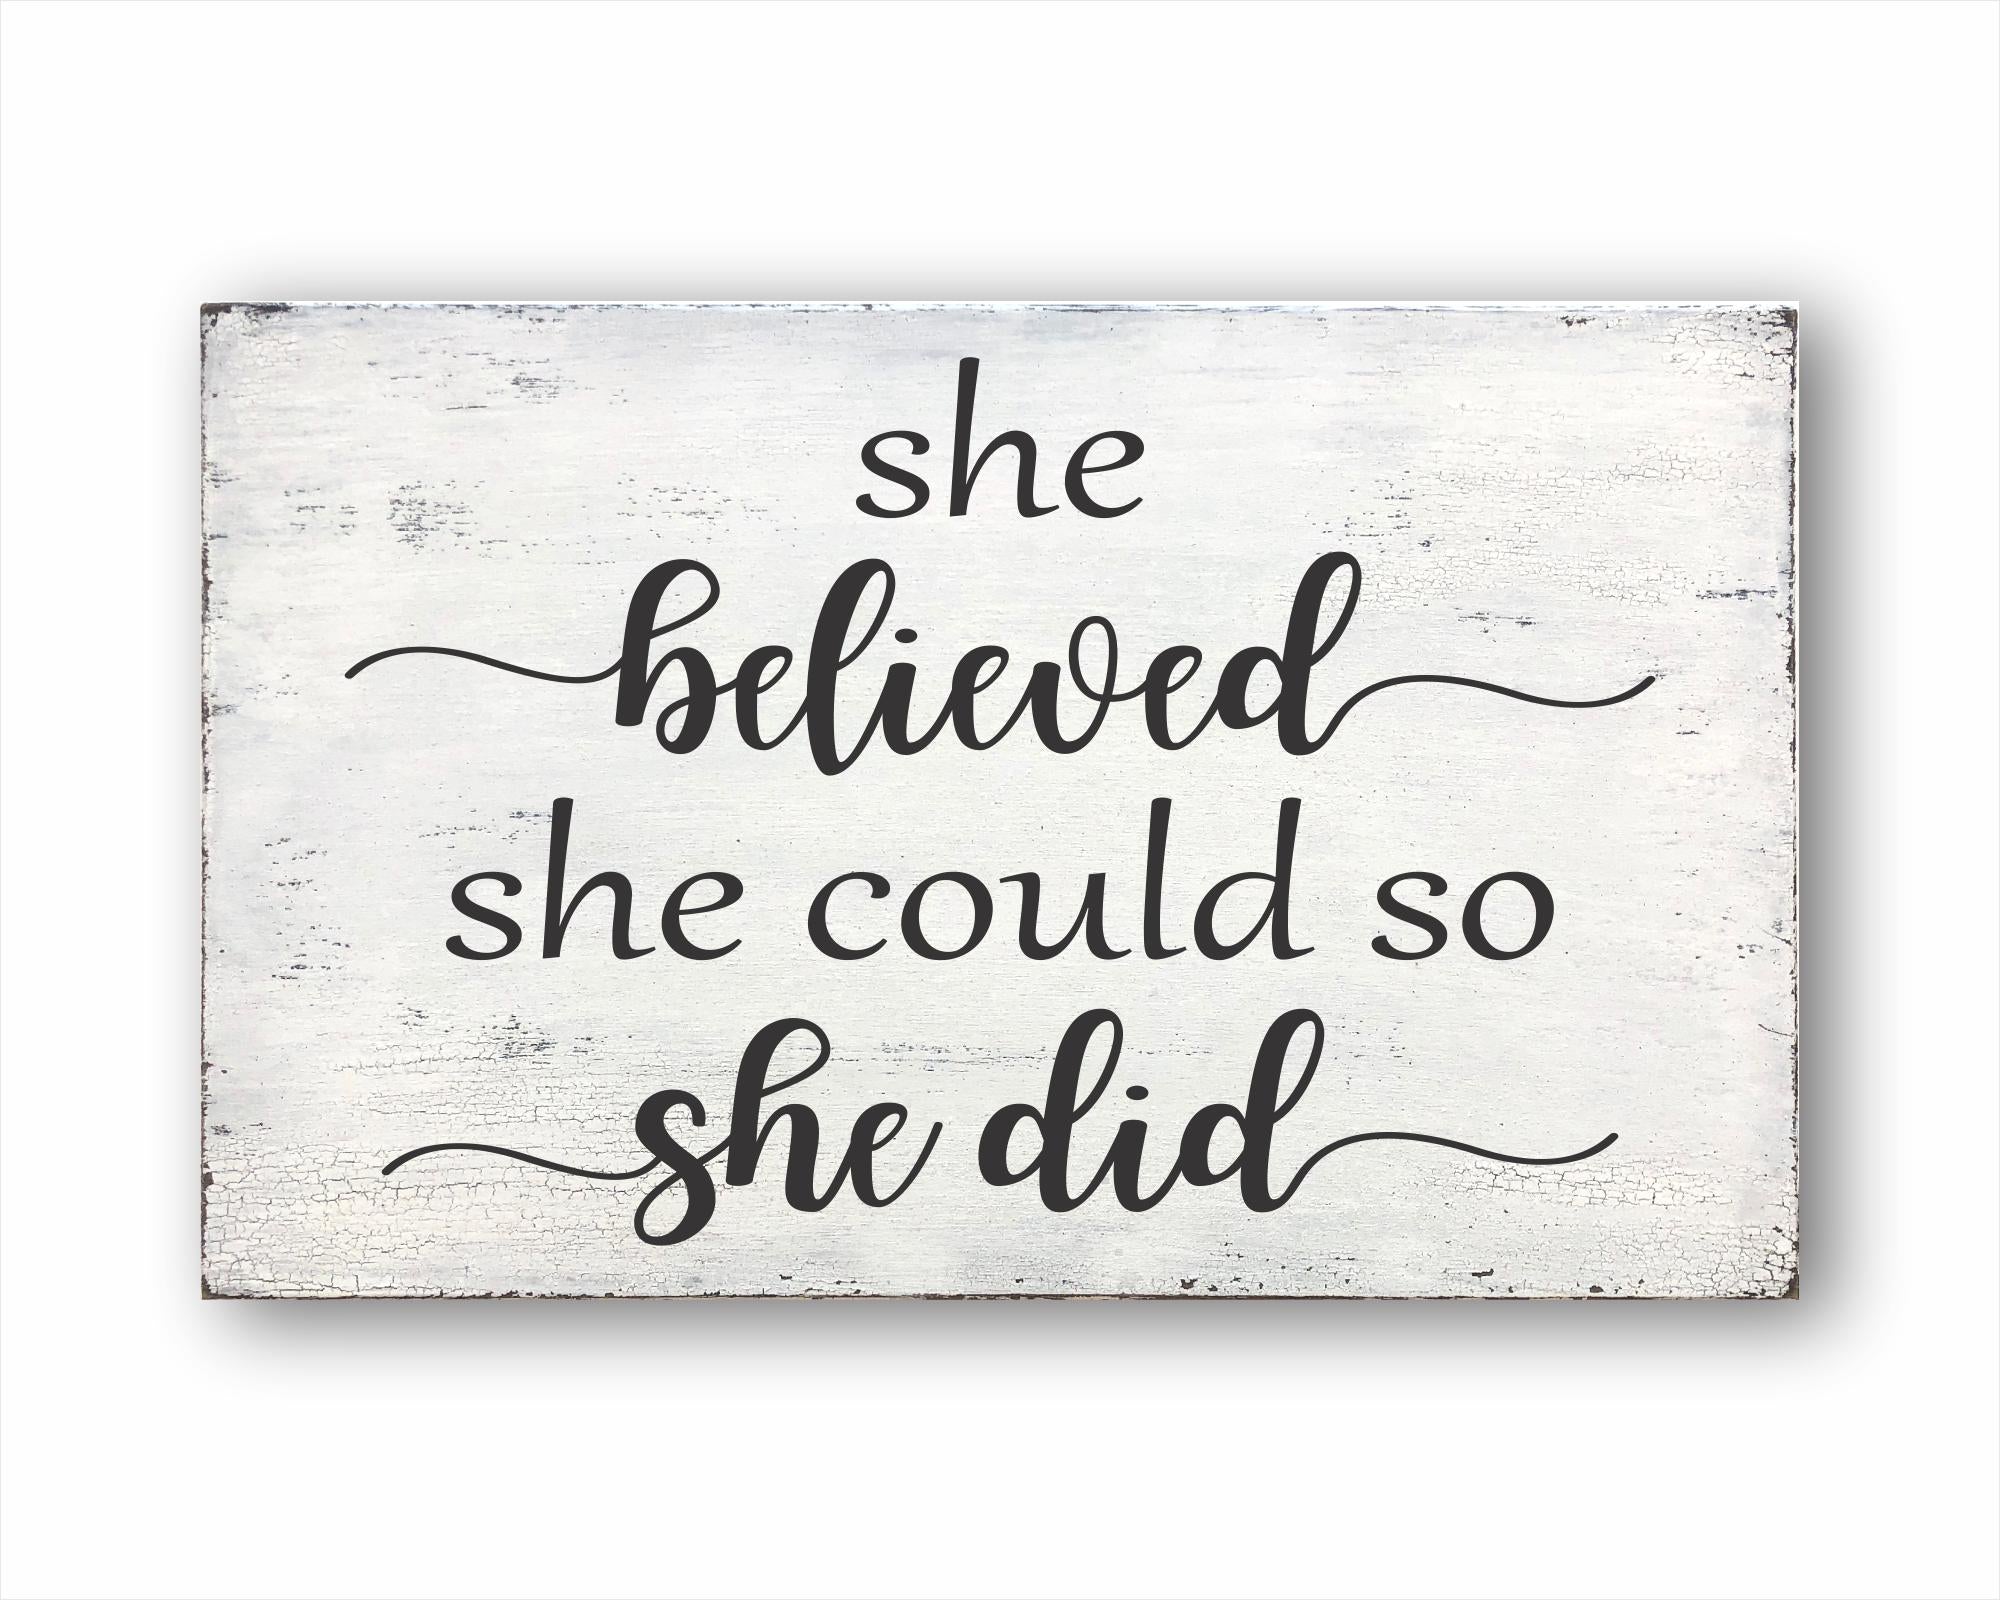 Wonderbaar Sign For Sale: She Believed She Could So She Did - mayberrycorner LX-32